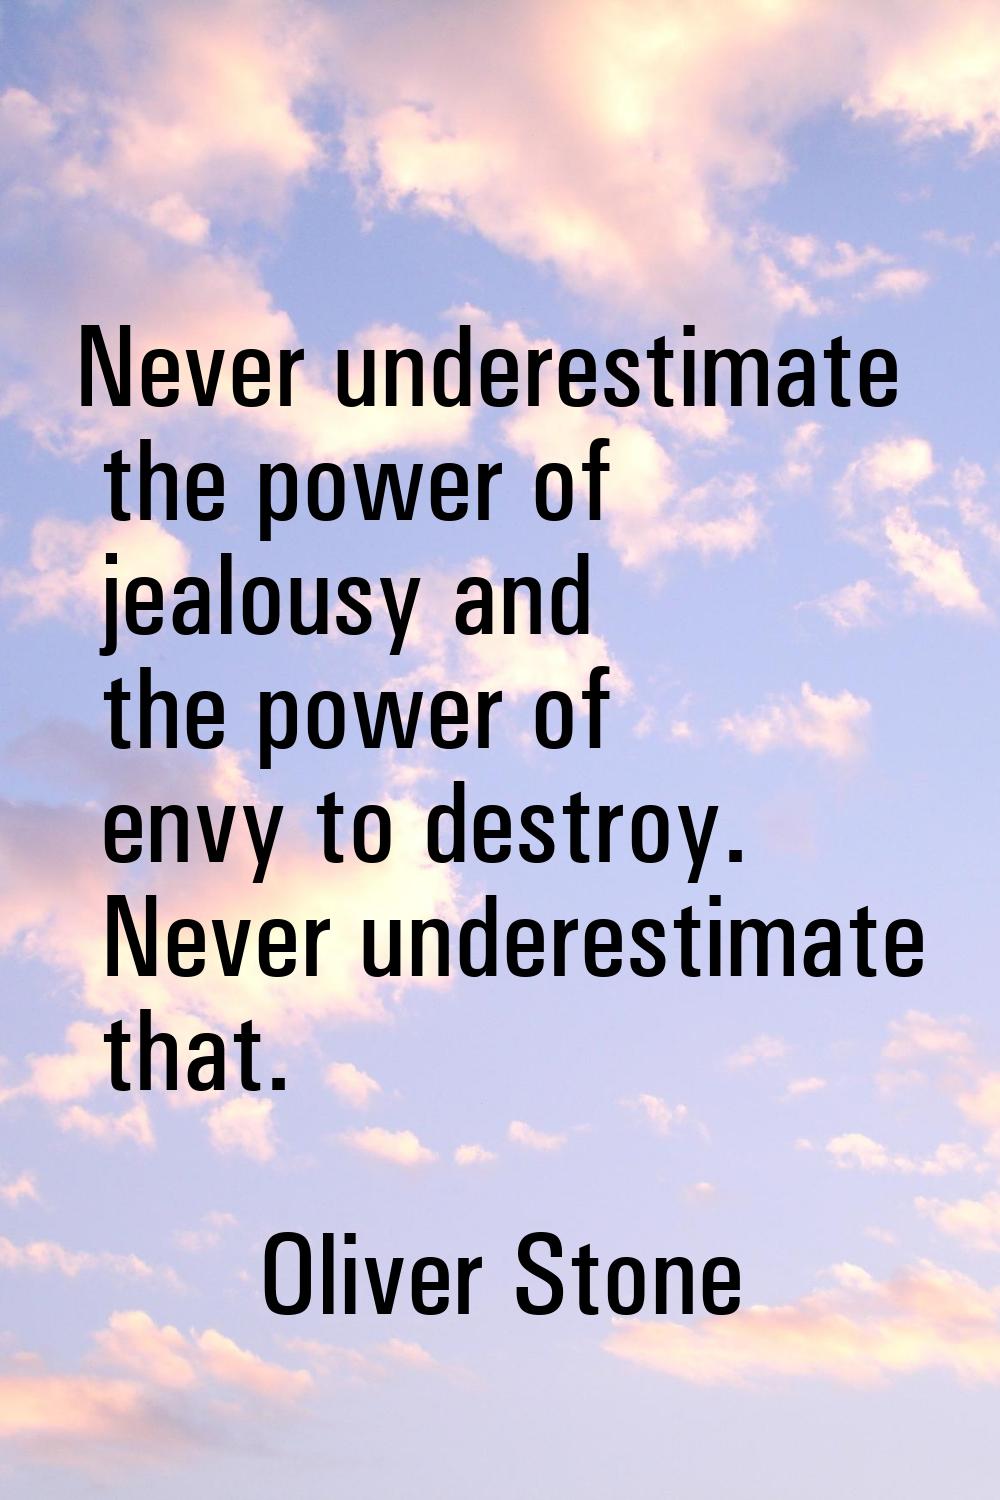 Never underestimate the power of jealousy and the power of envy to destroy. Never underestimate tha